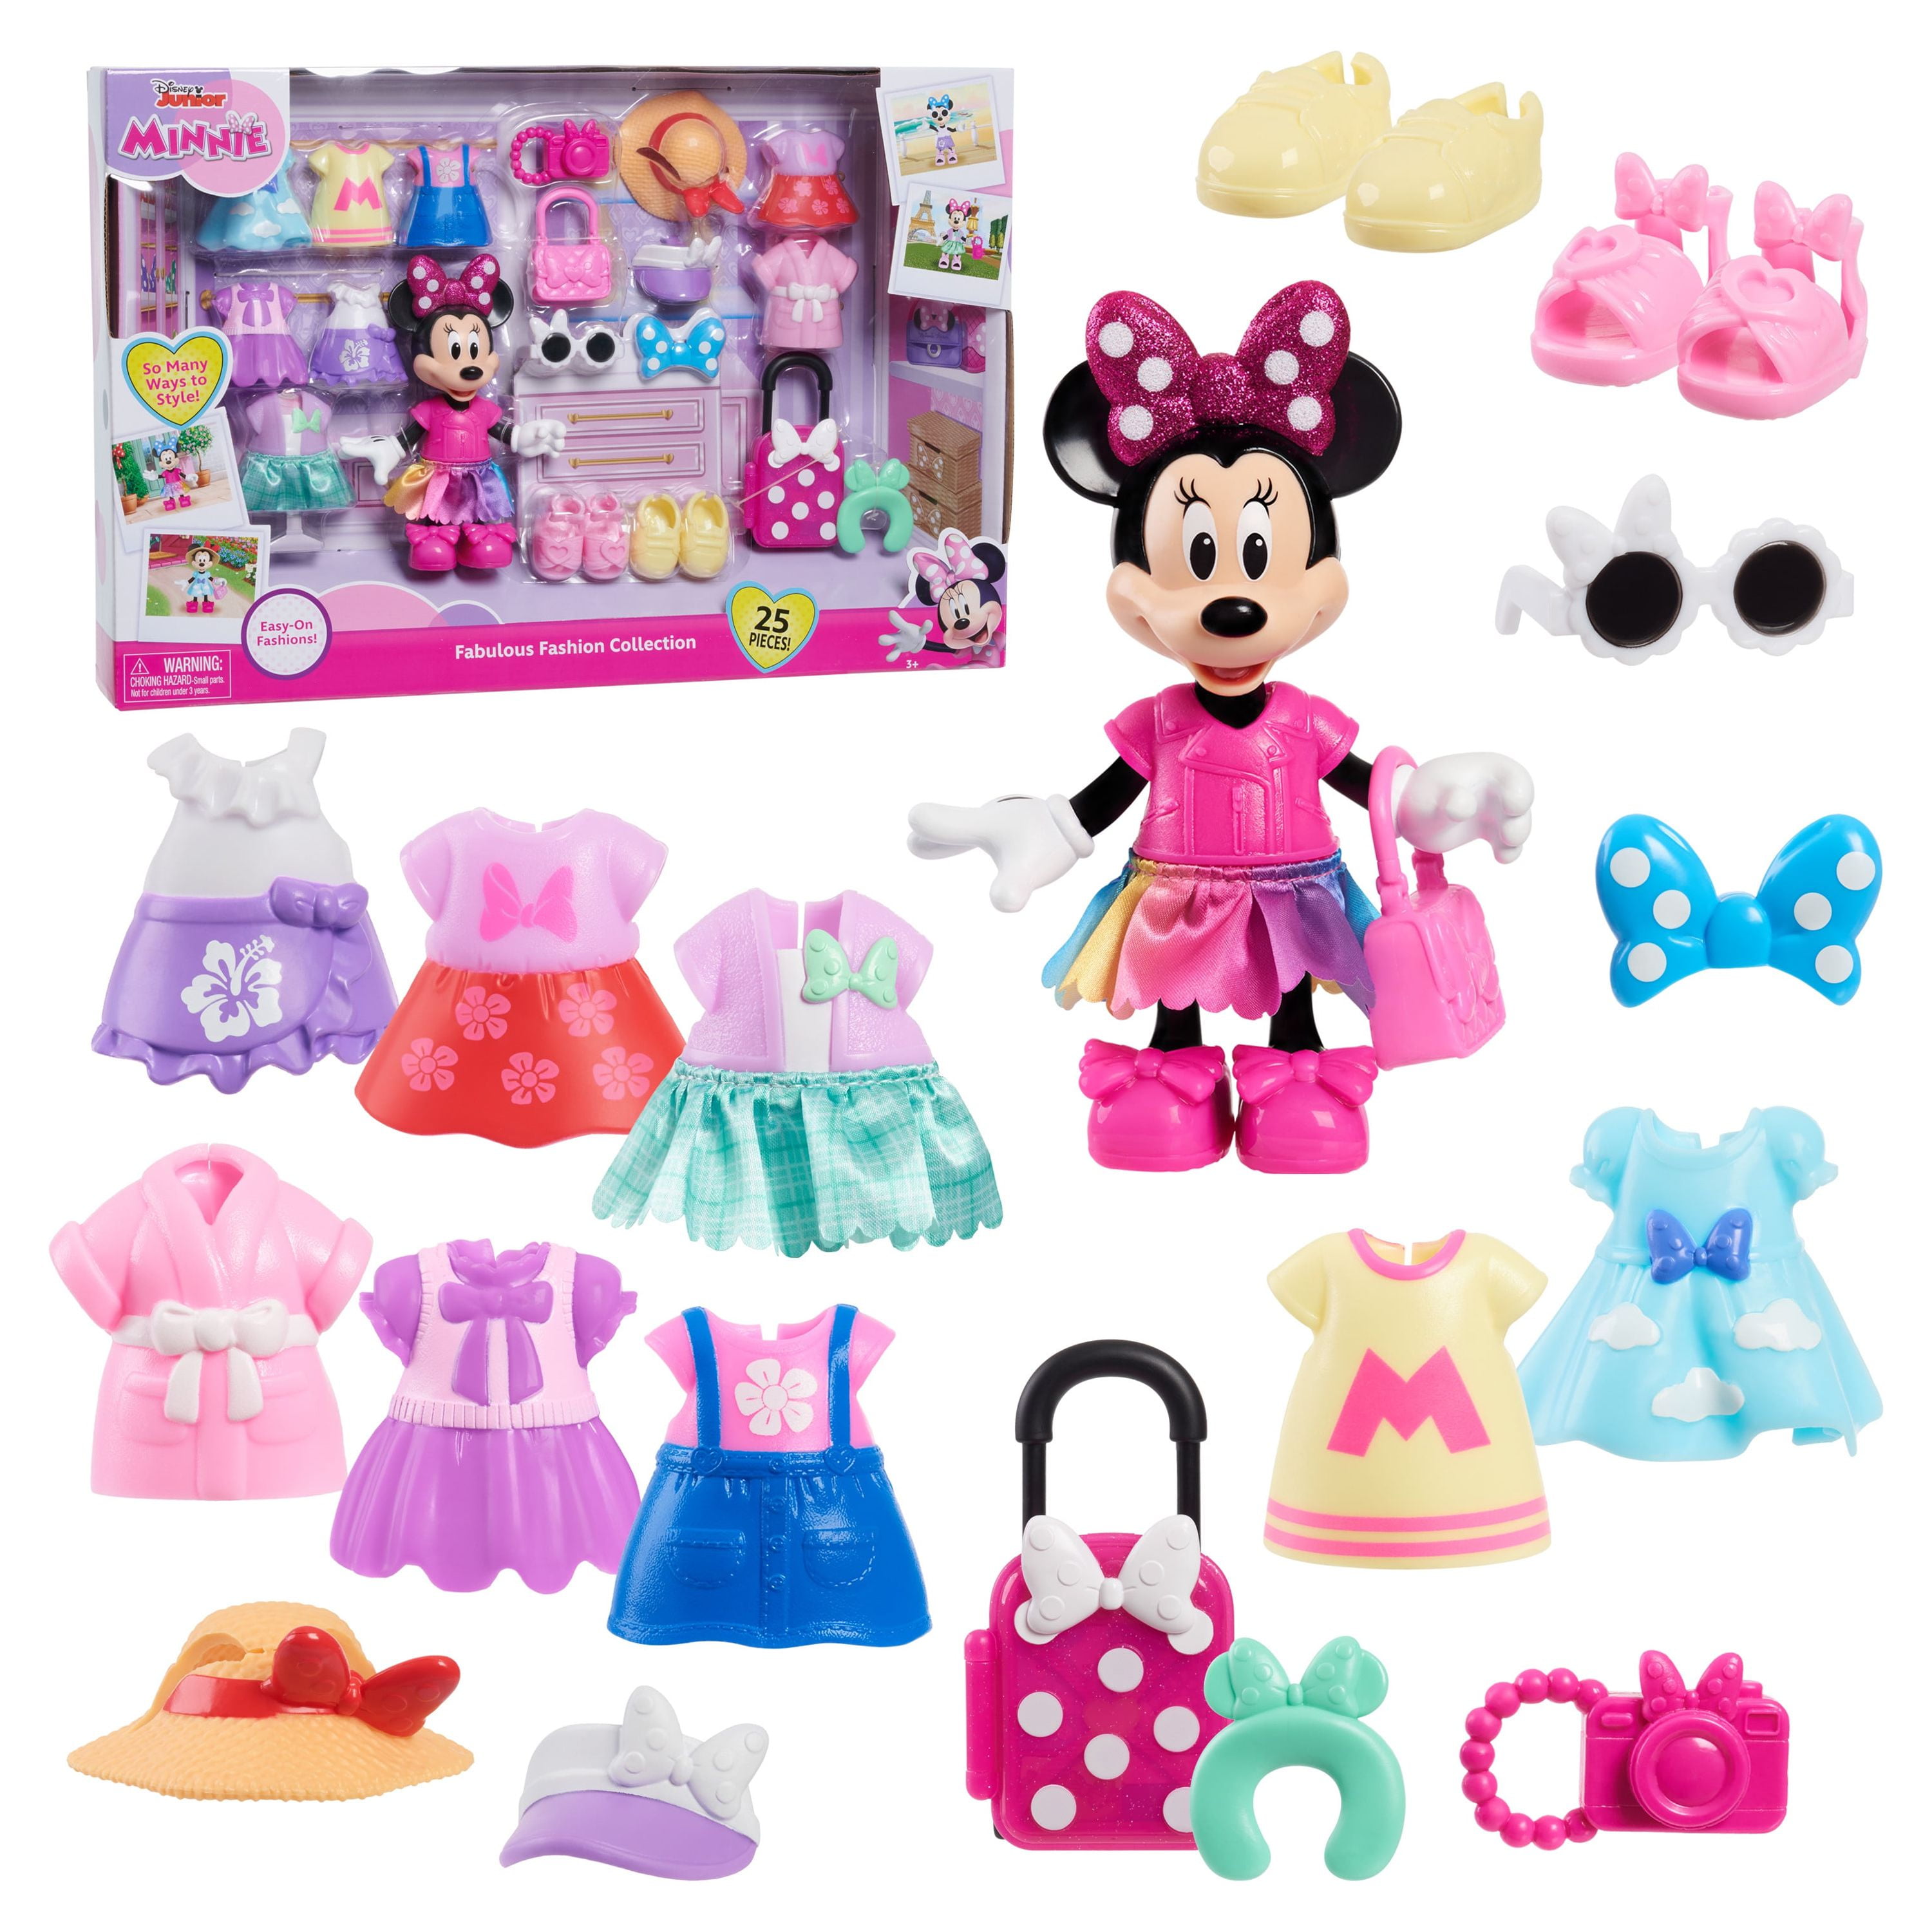 Disney Junior Minnie Mouse 7-Piece Figure Set, Kids Toys for Ages 3 Up, Size: 11.75 inches; 2.0 inches; 6.0 Inches